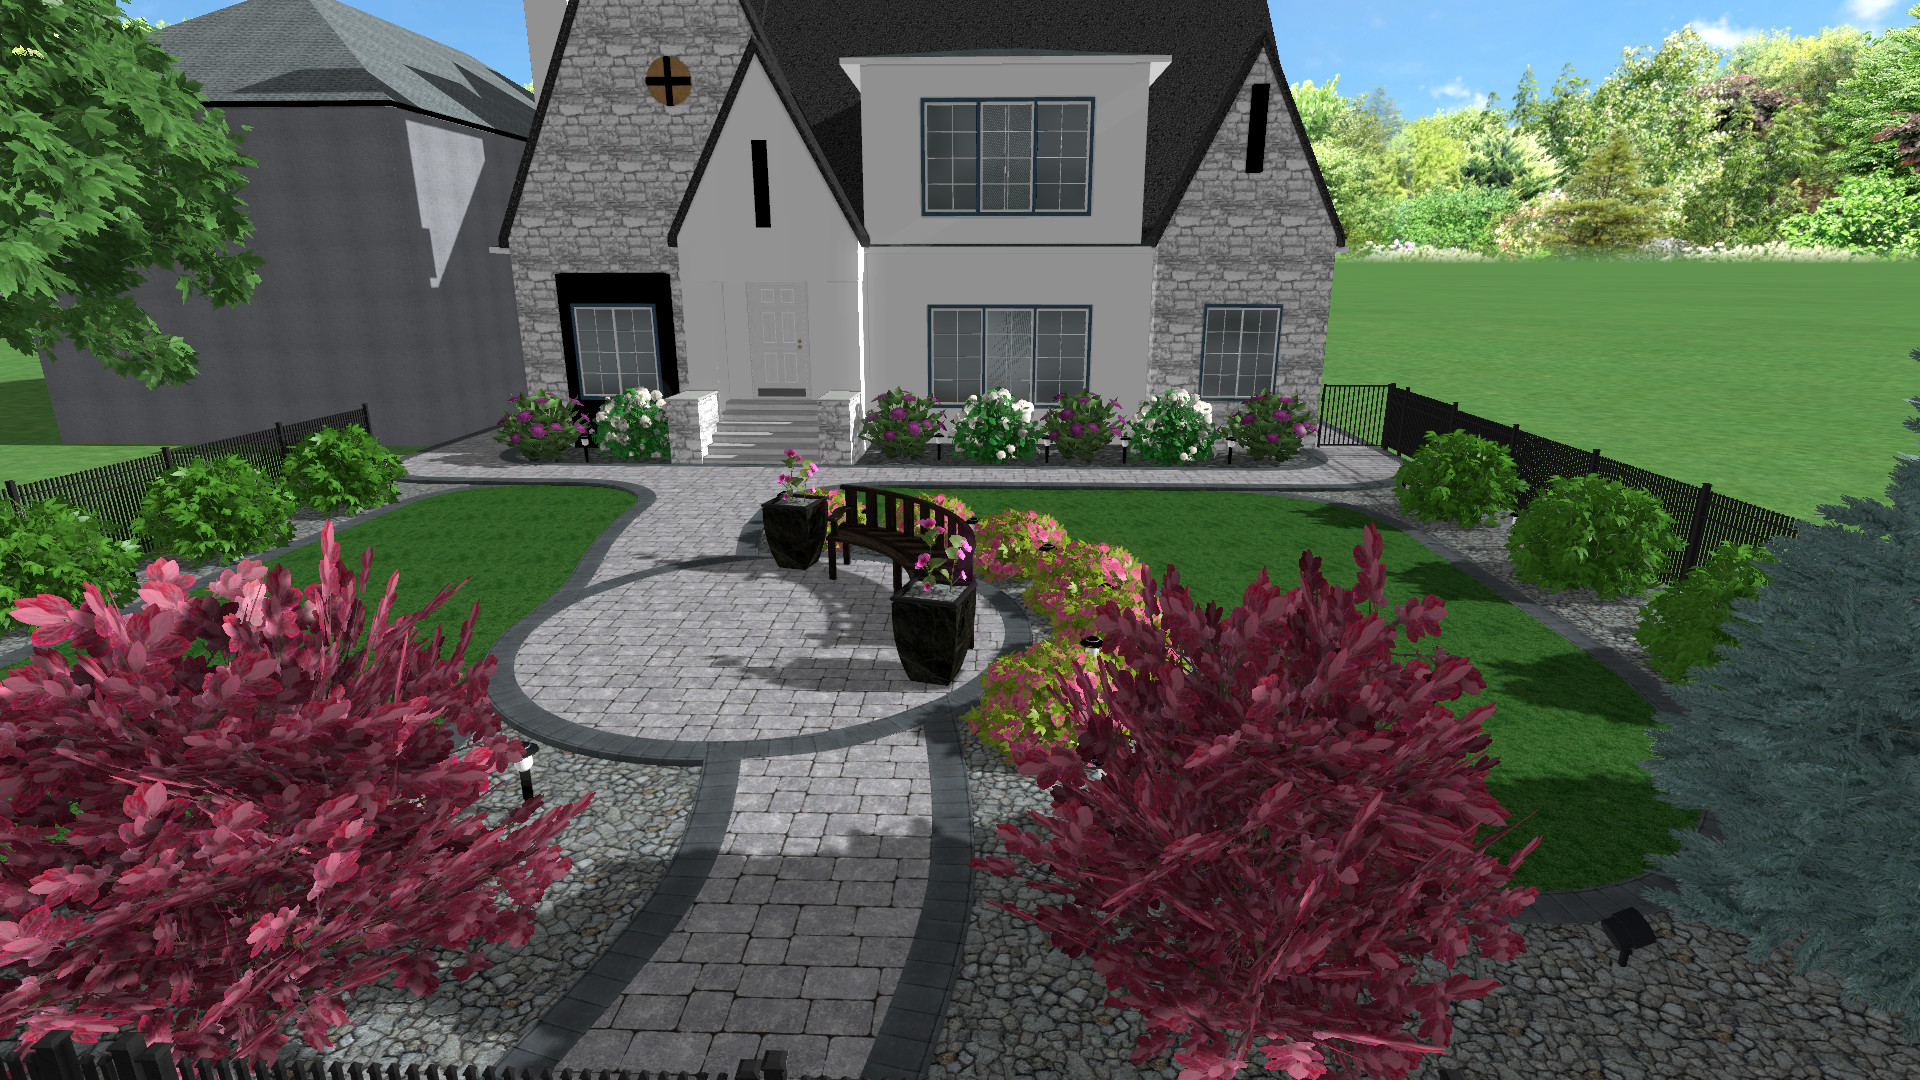 3D Landscape Design of Front yard with roman paver walkway and circular seating area